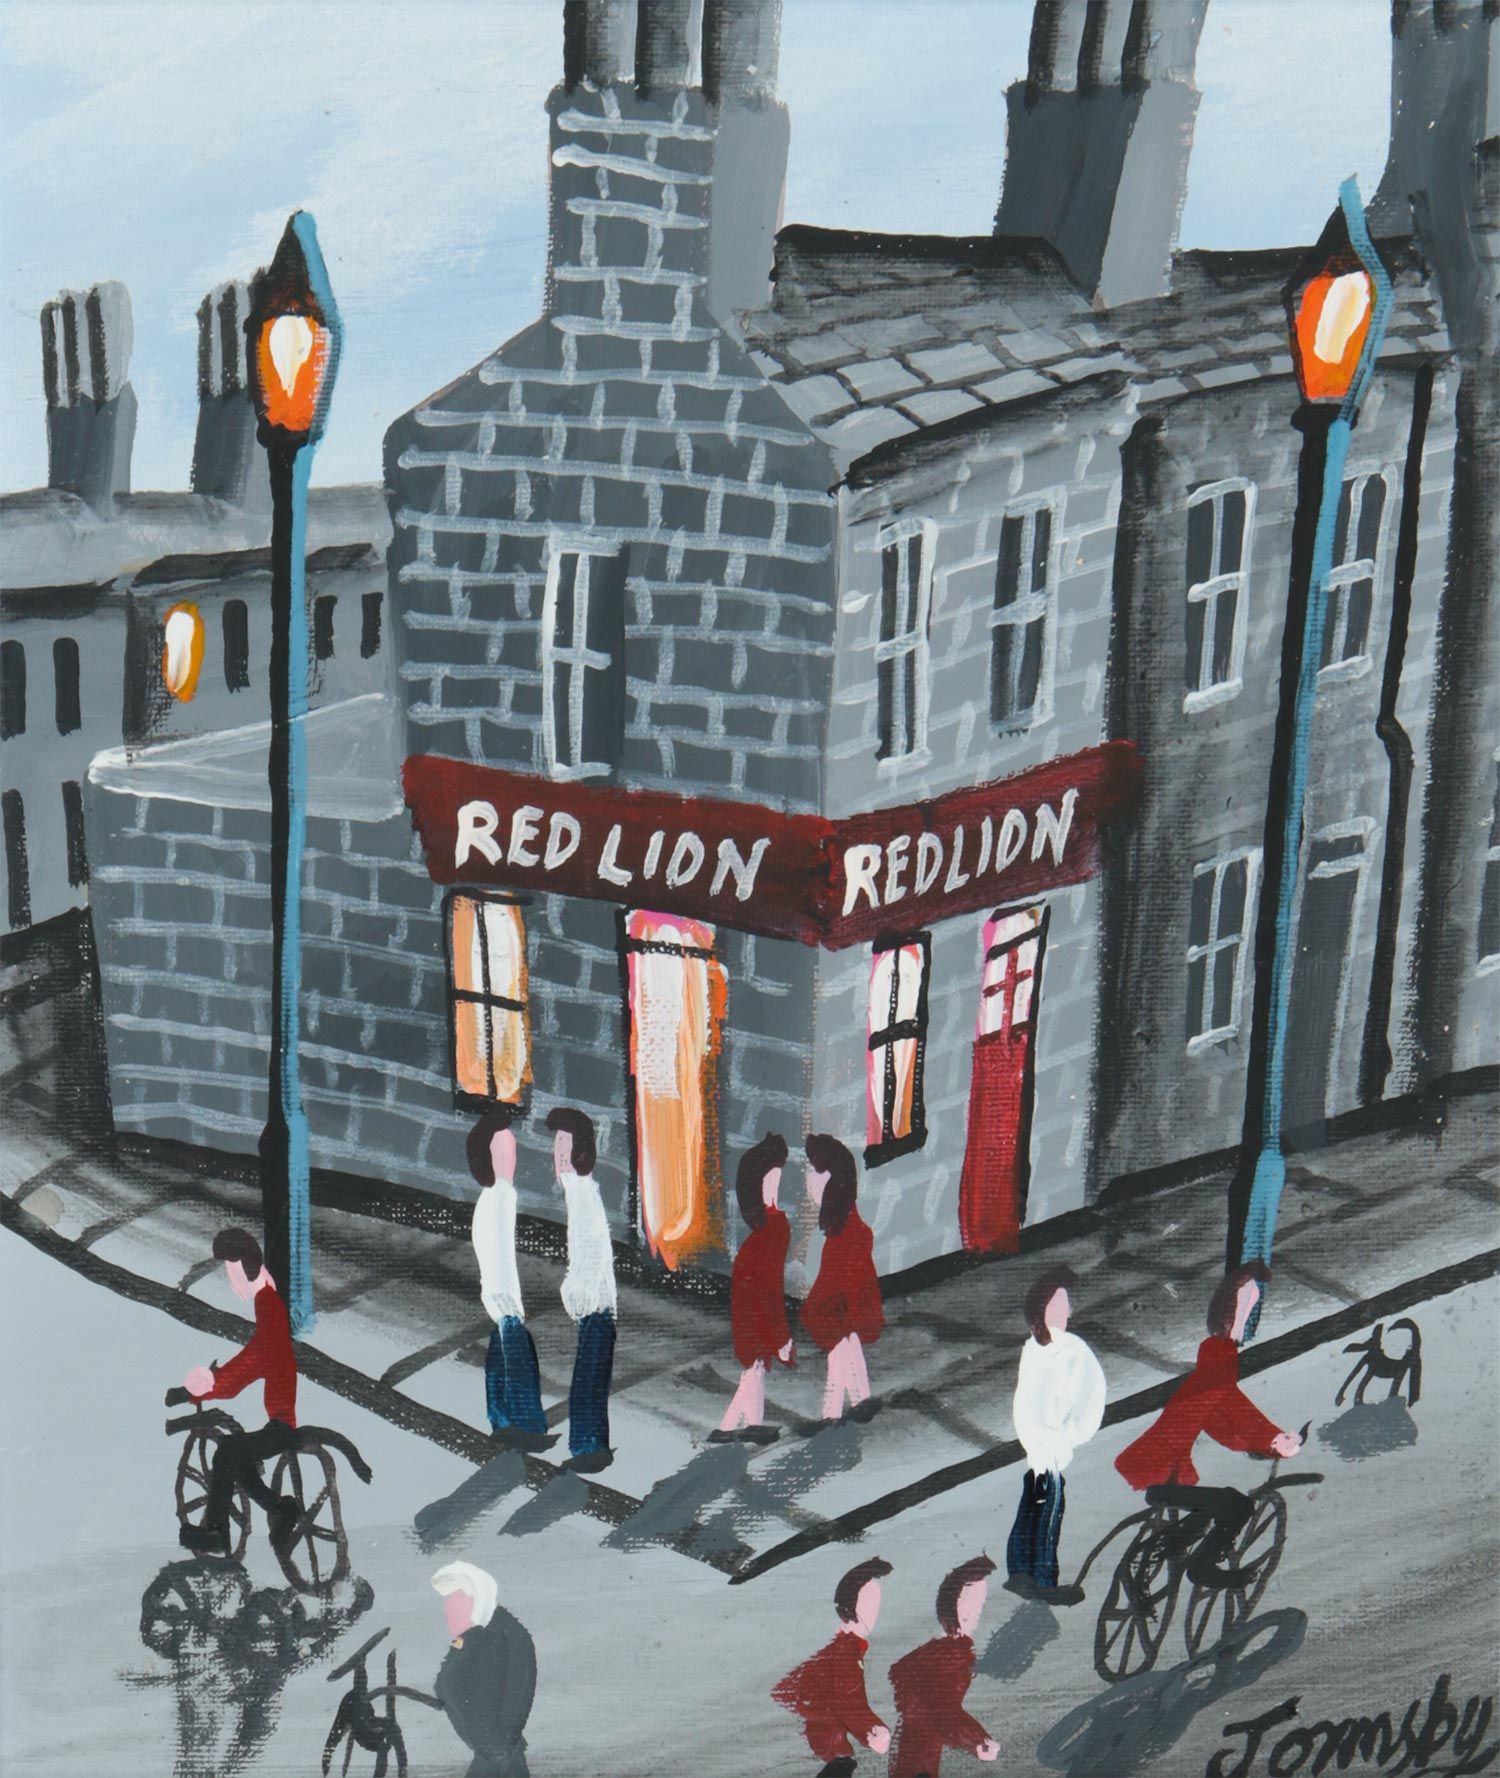 THE RED LION by John Ormsby